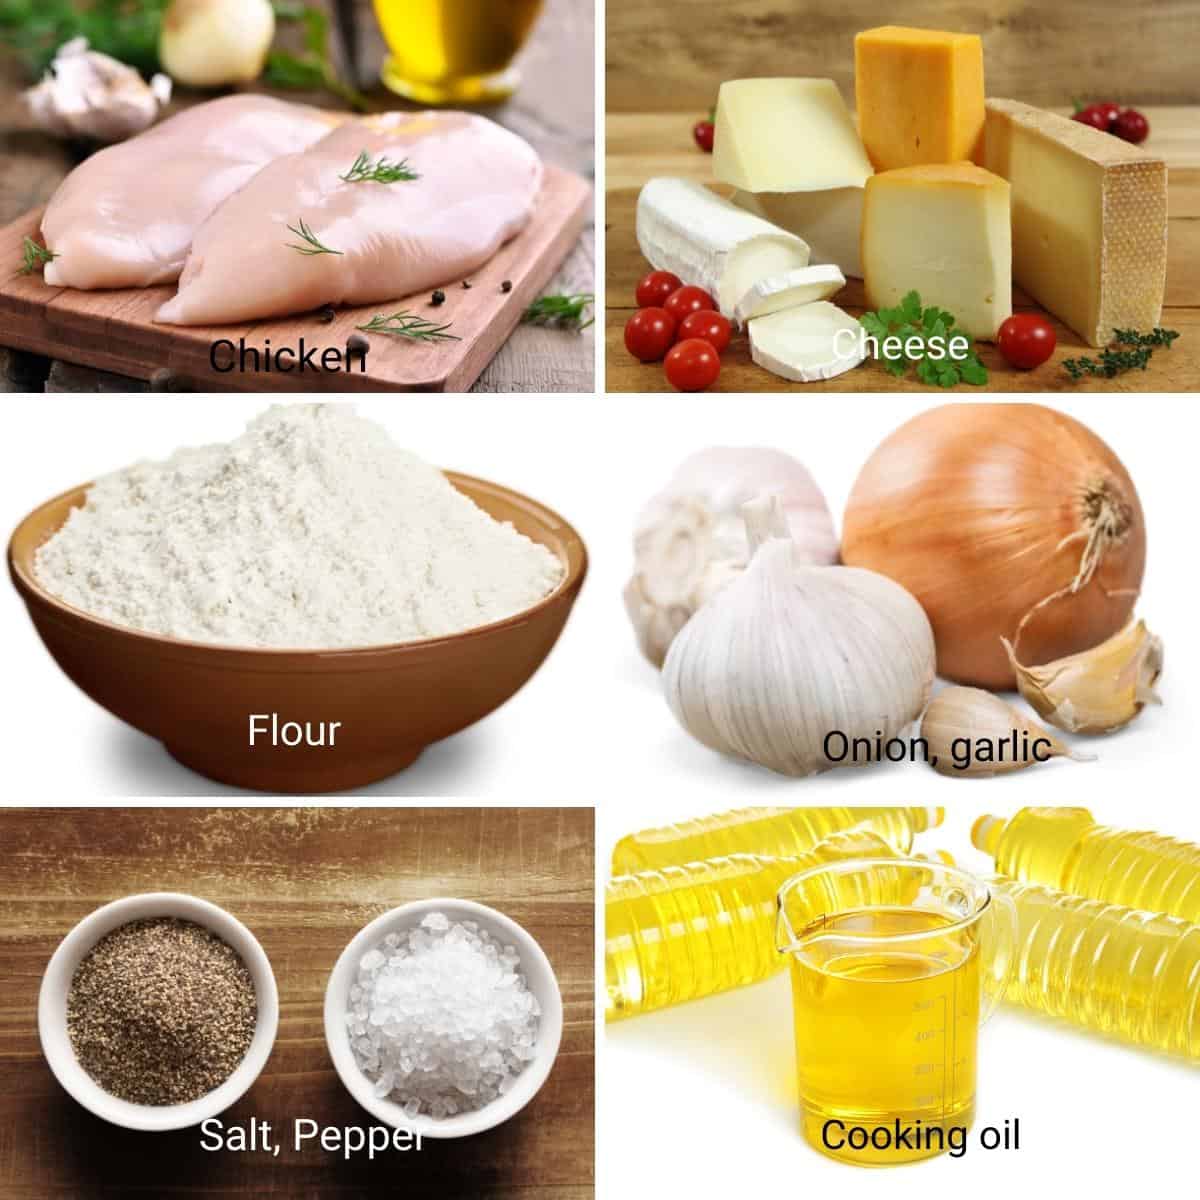 Ingredients for making stuffed chicken breast.